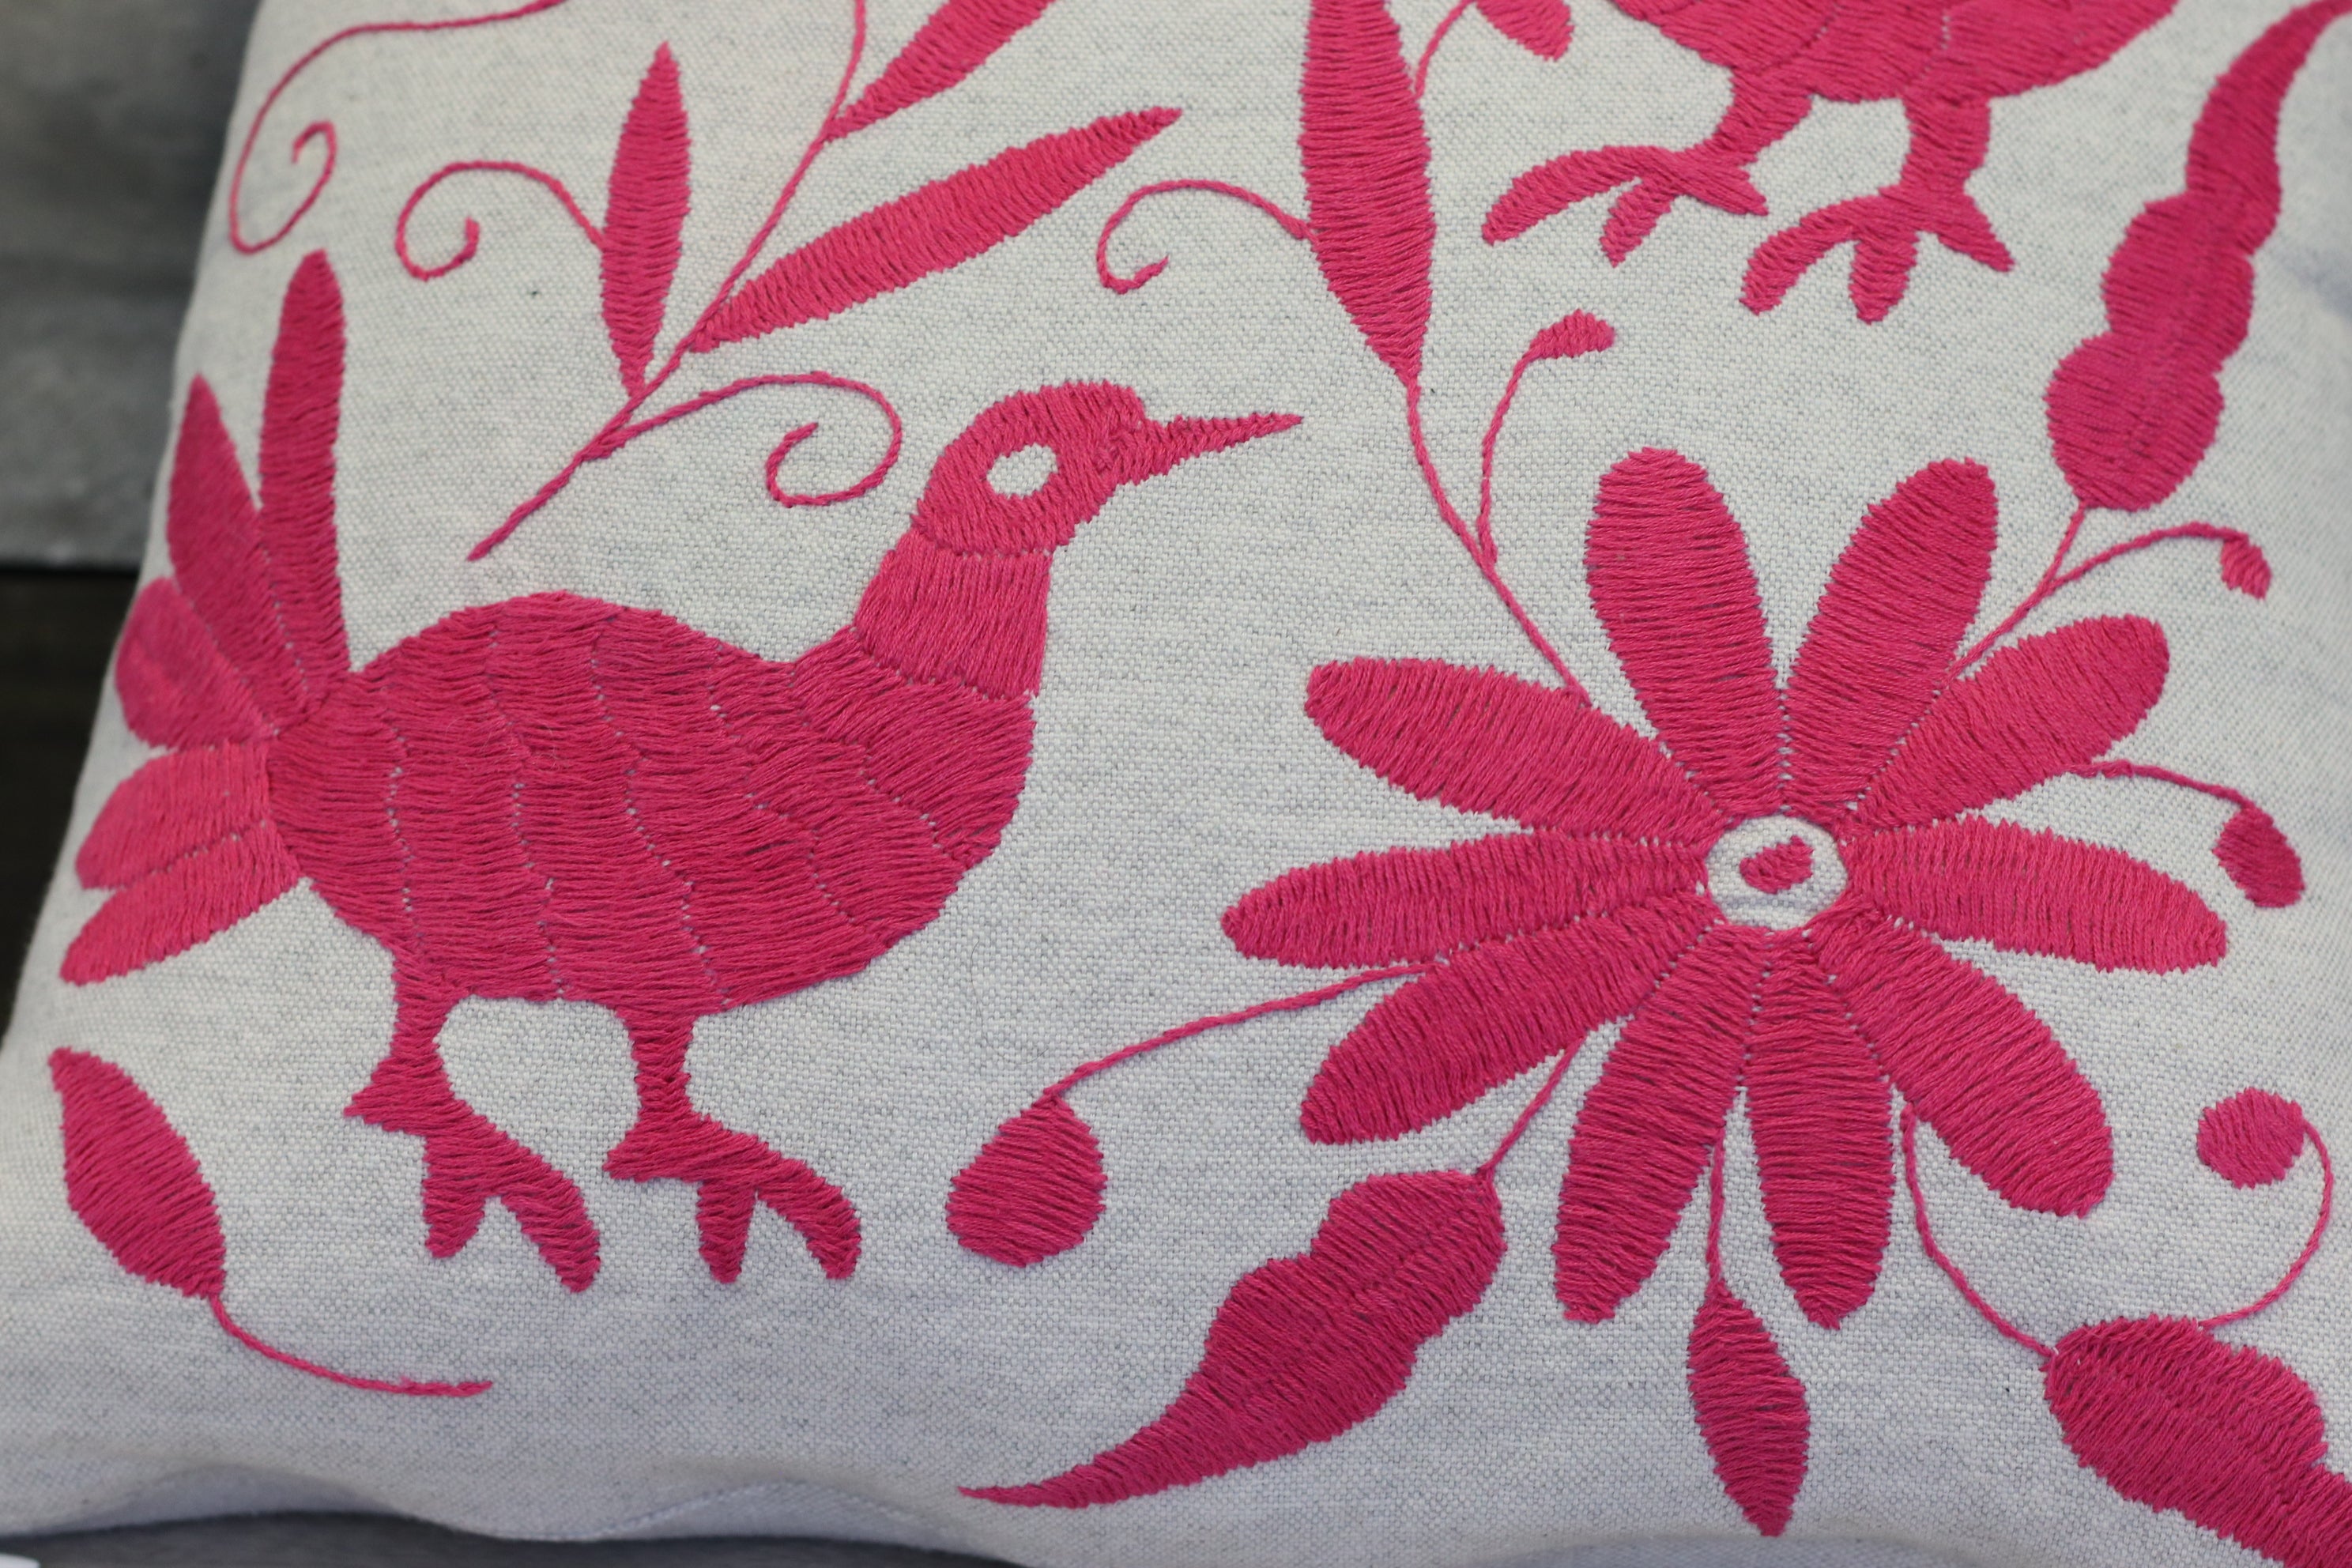 Pink Hand Embroidered Bird and Flower Pillow Cover on Gray Background. Handmade in Mexico. Ships from the USA. Buy now at www.felipeandgrace.com.  